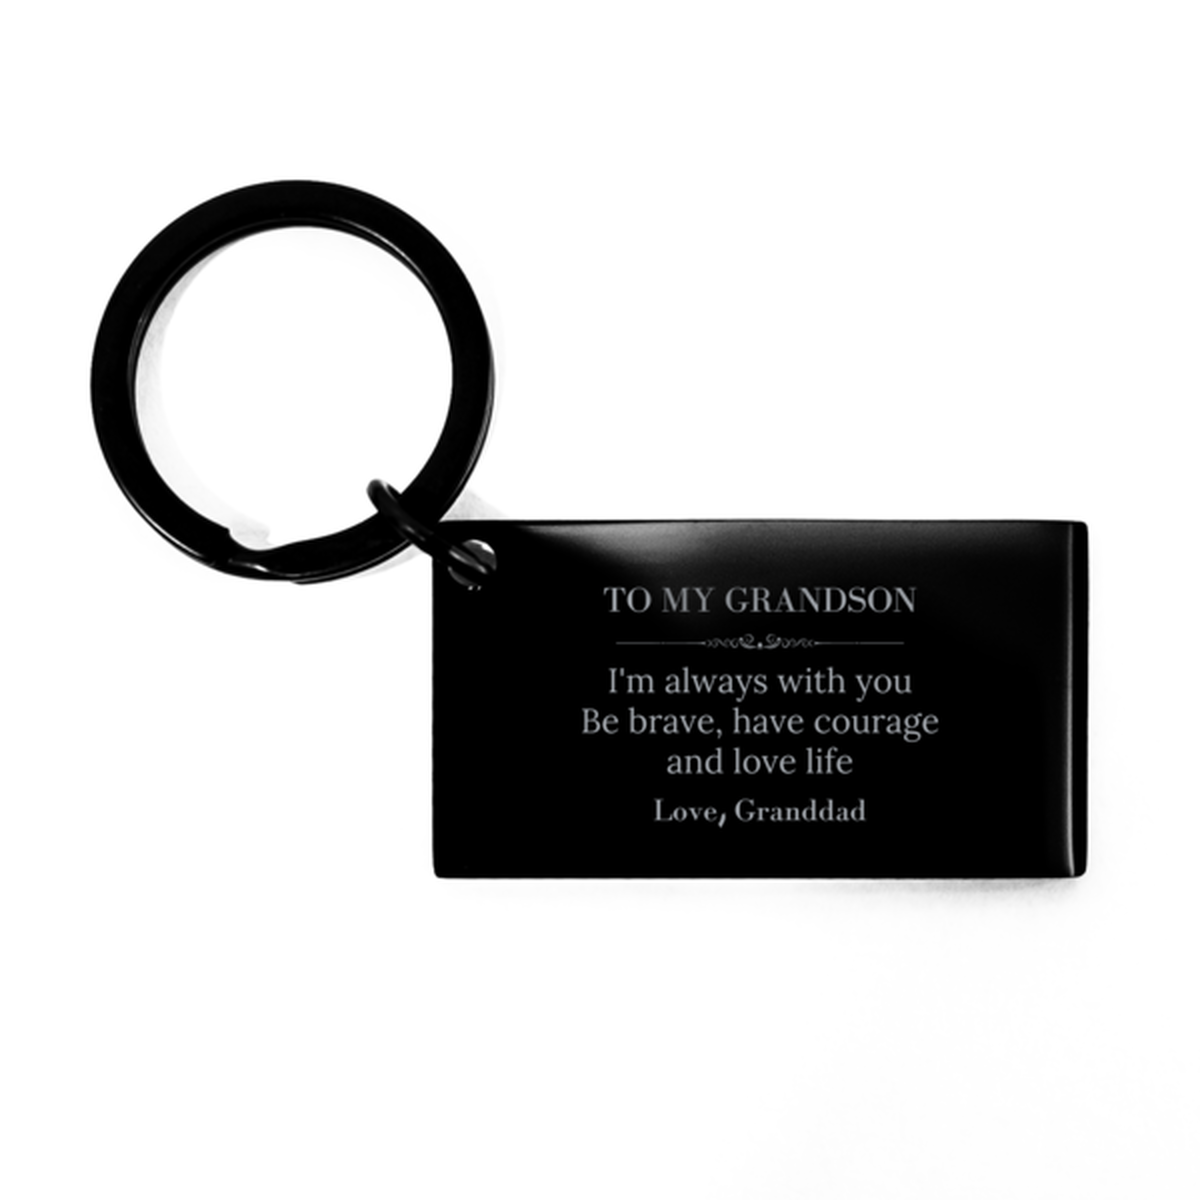 To My Grandson Gifts from Granddad, Unique Keychain Inspirational Christmas Birthday Graduation Gifts for Grandson I'm always with you. Be brave, have courage and love life. Love, Granddad